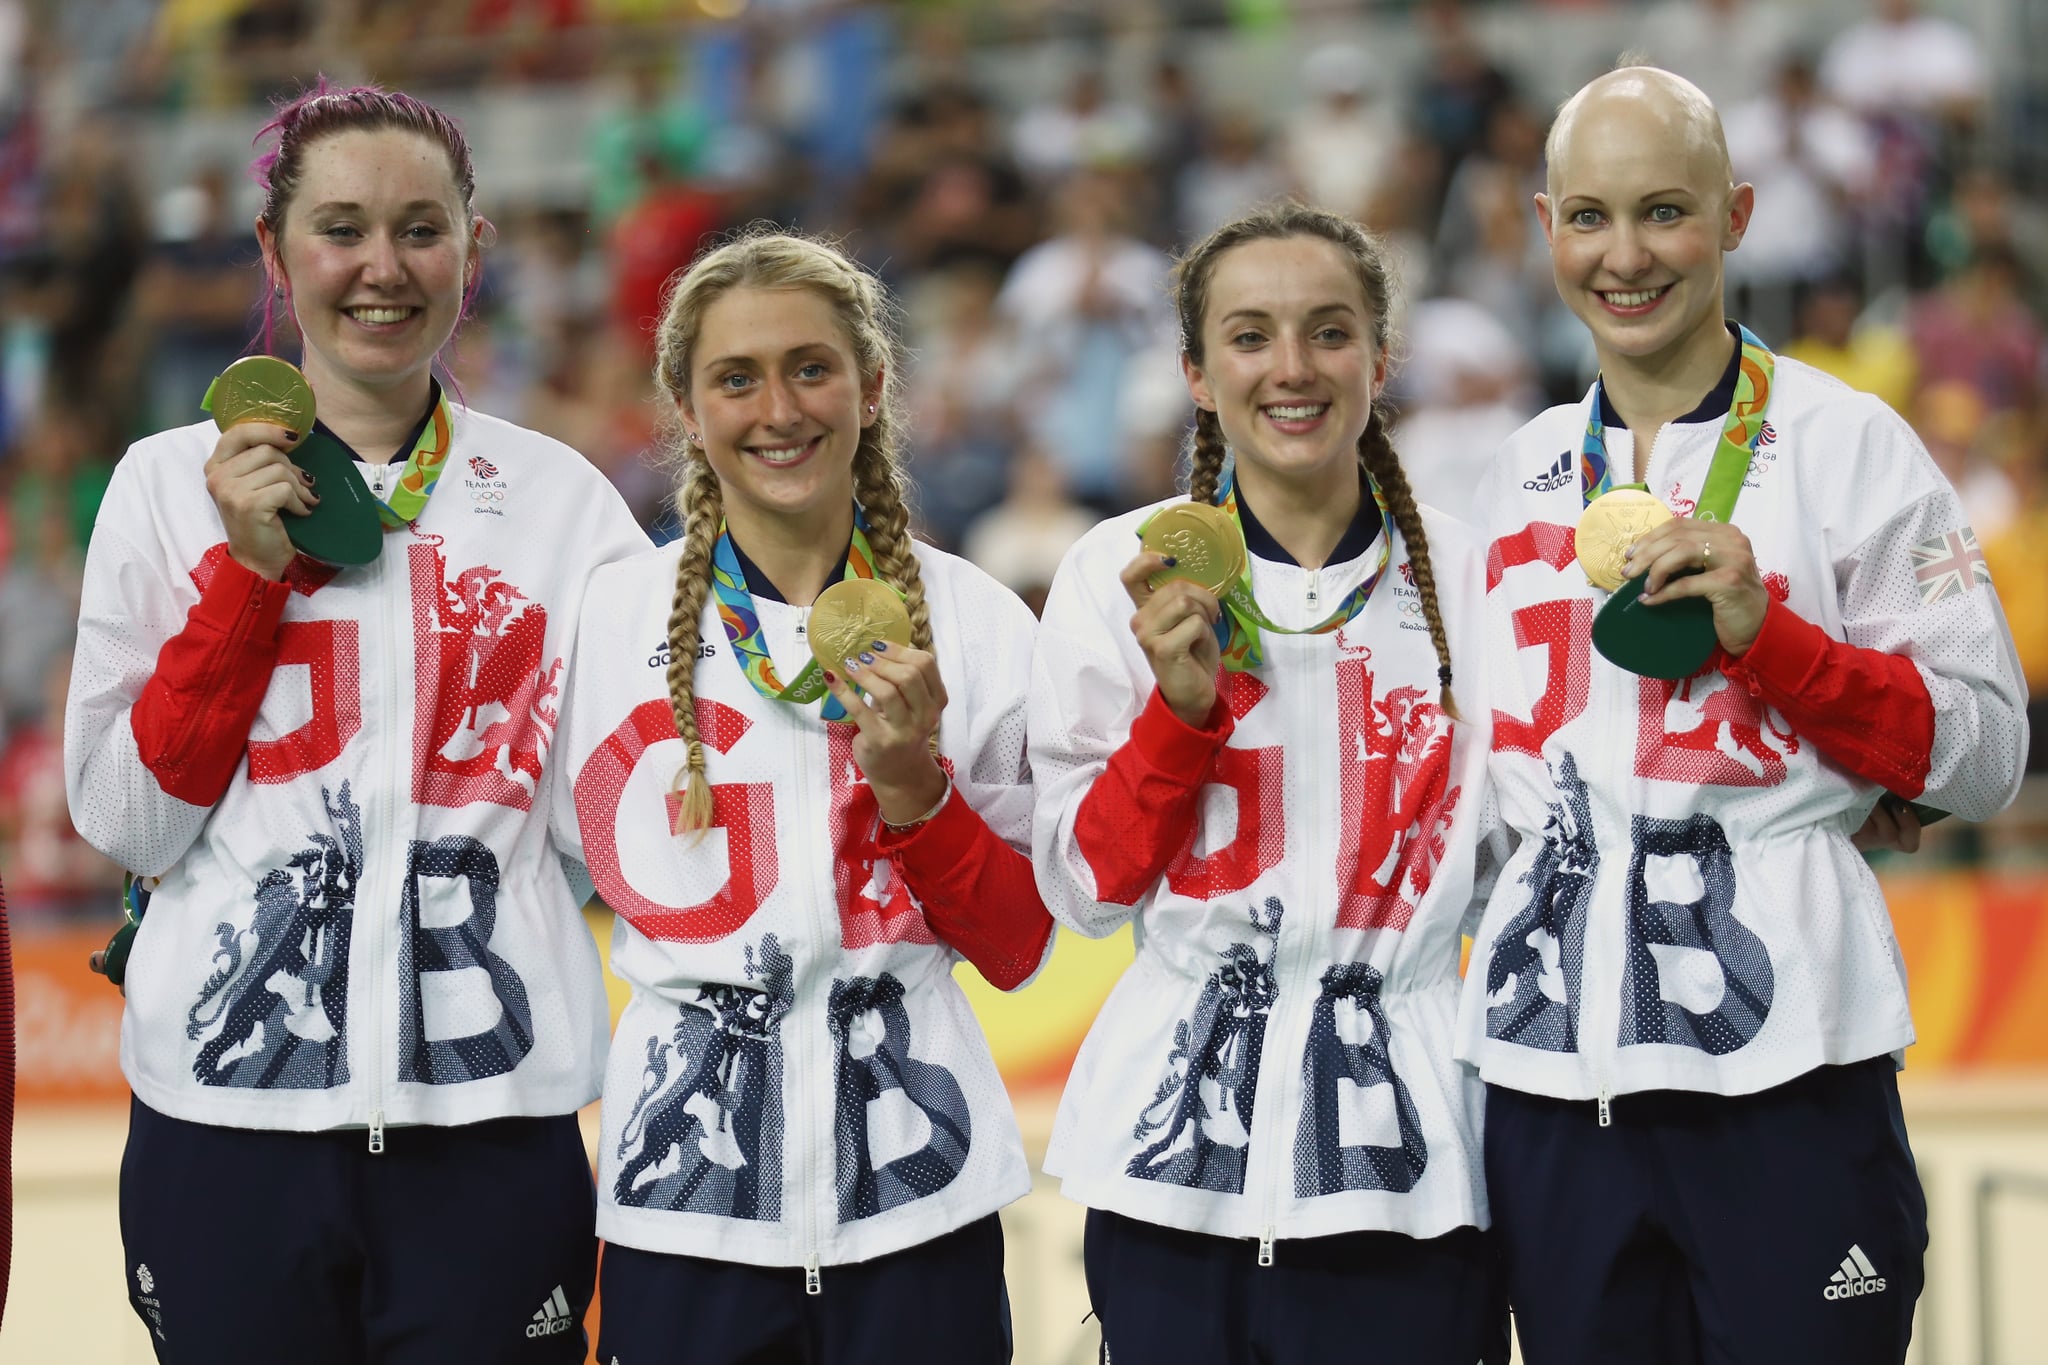 RIO DE JANEIRO, BRAZIL - AUGUST 13:  Gold medalists Laura Trott, Joanna Rowsell-Shand, Katie Archibald, Elinor Barker of Great Britain celebrate on the podium at the medal ceremony for the Women's Team Pursuit on Day 8 of the Rio 2016 Olympic Games at the Rio Olympic Velodrome on August 13, 2016 in Rio de Janeiro, Brazil.  (Photo by Bryn Lennon/Getty Images)